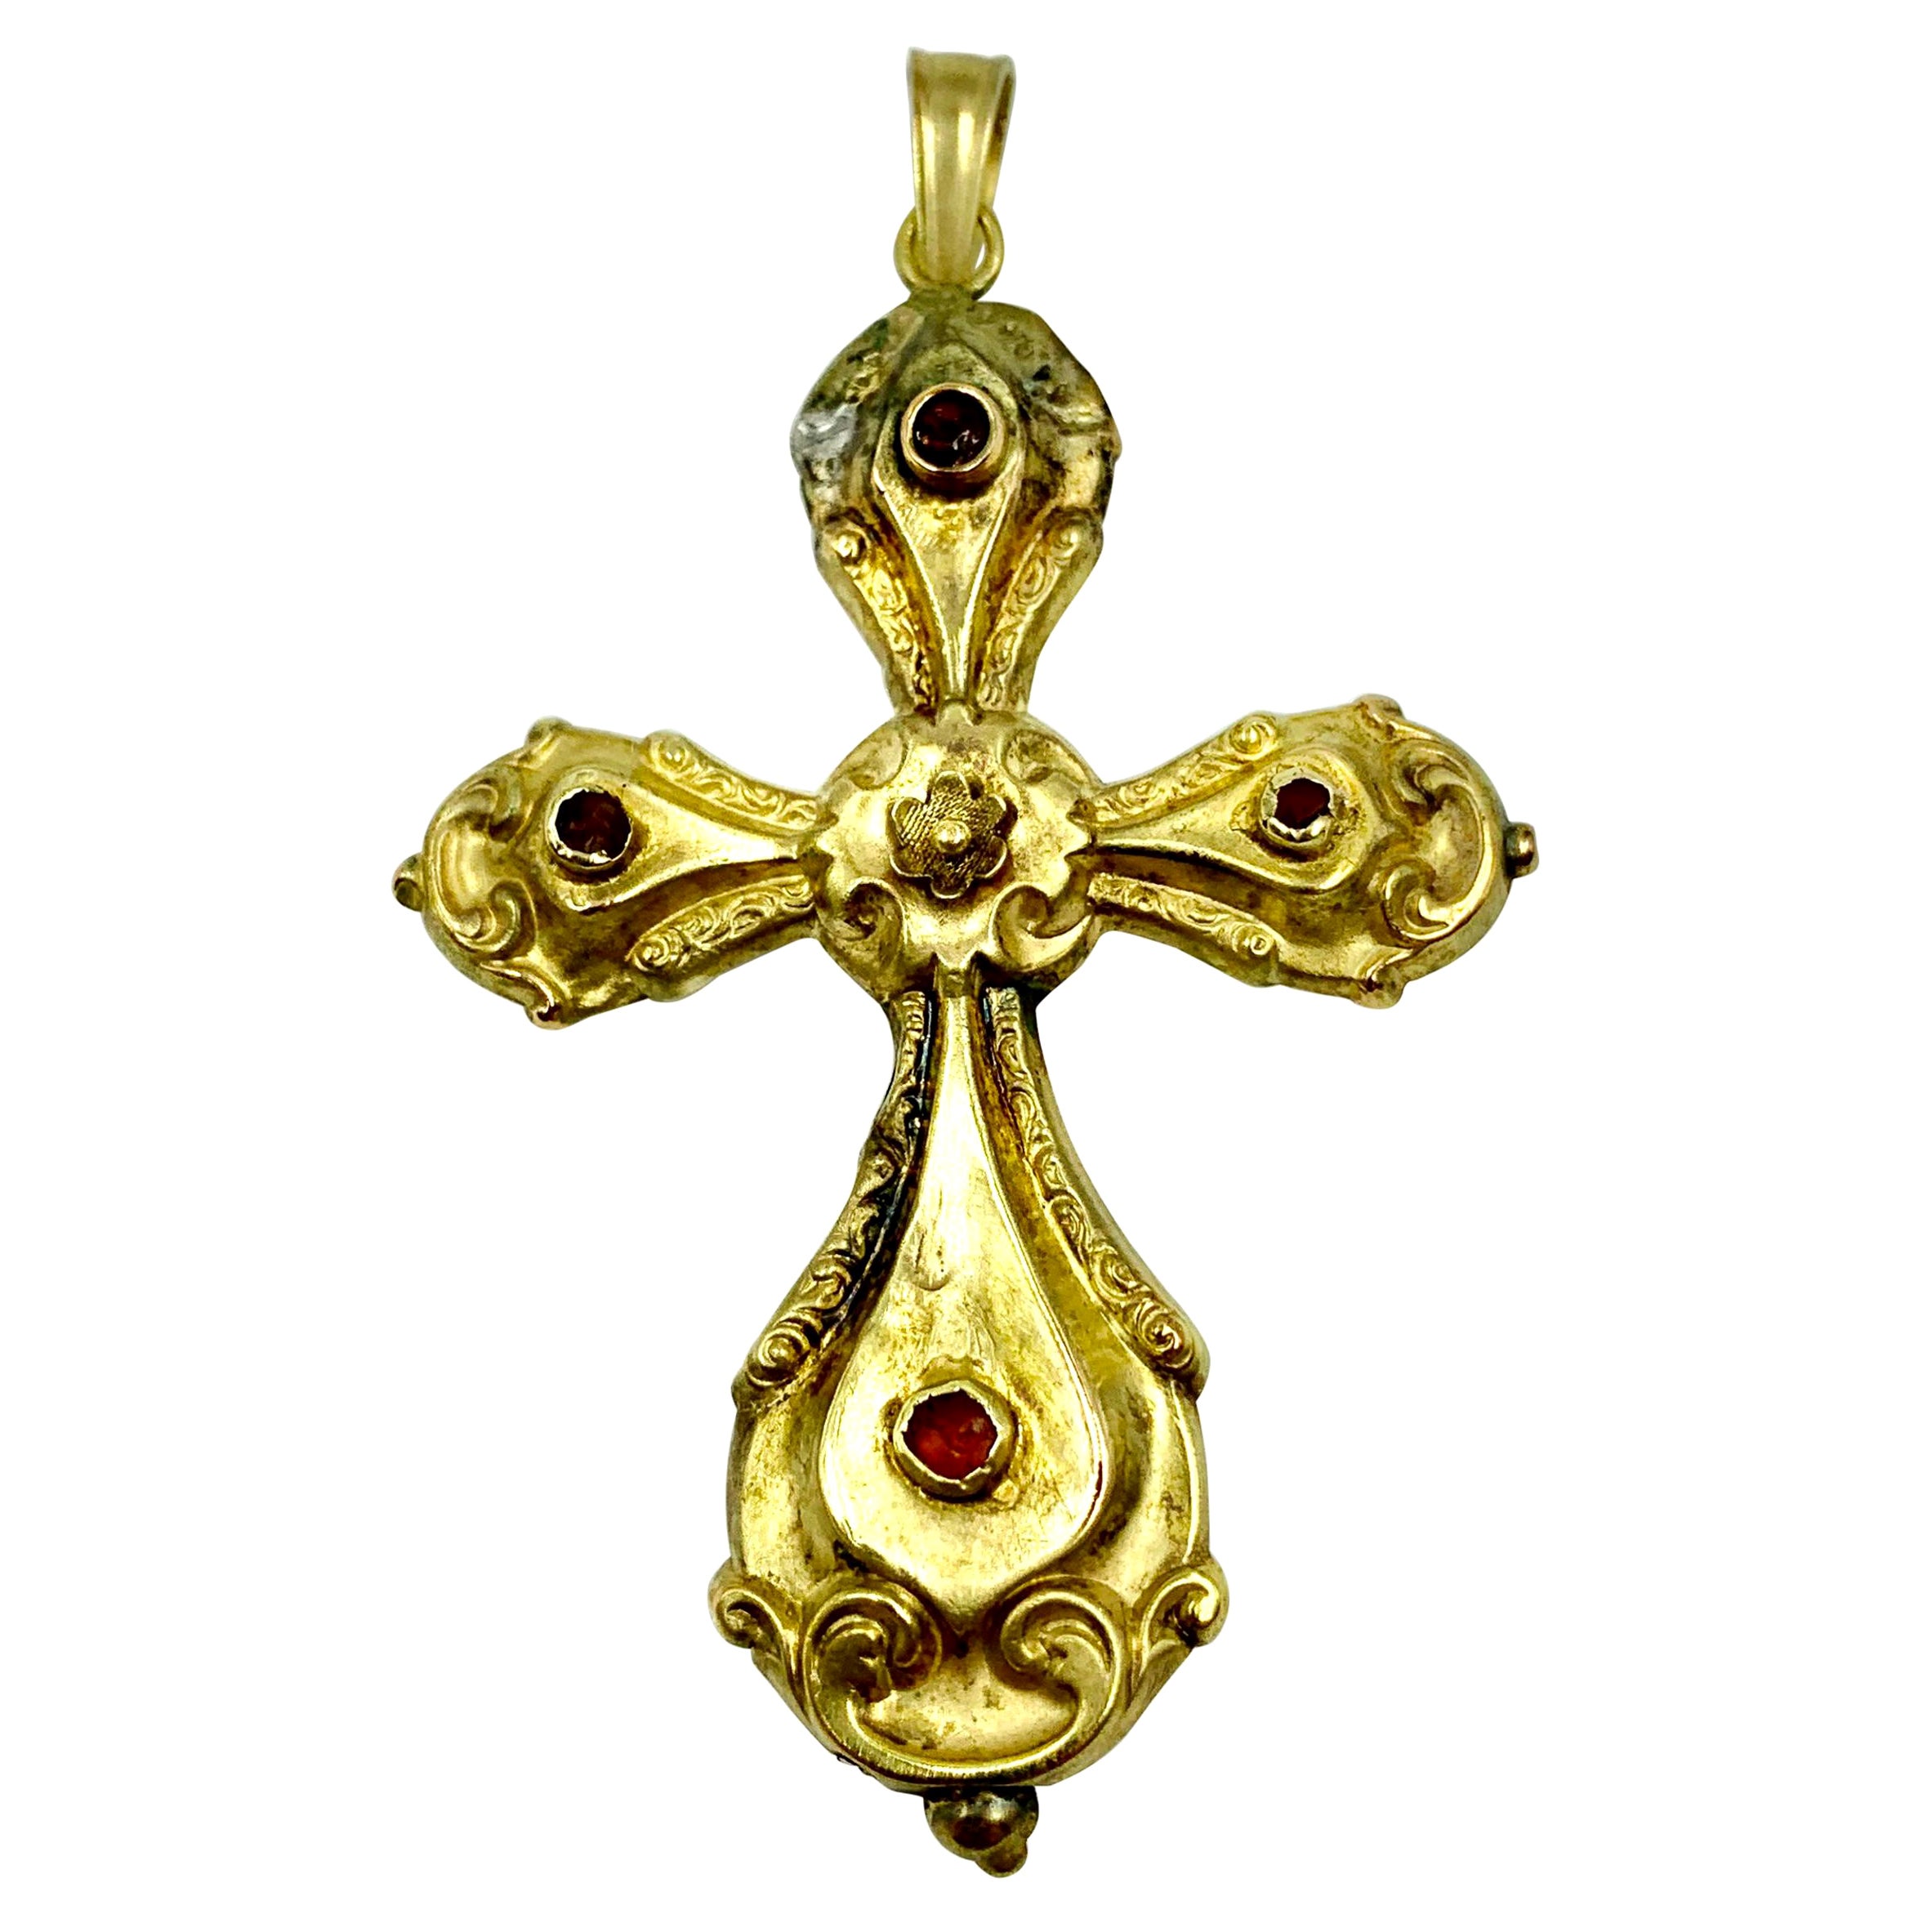 Rare Museum Quality 17th Century Baroque Gold, Cabochon Carnelian Rose Cross For Sale